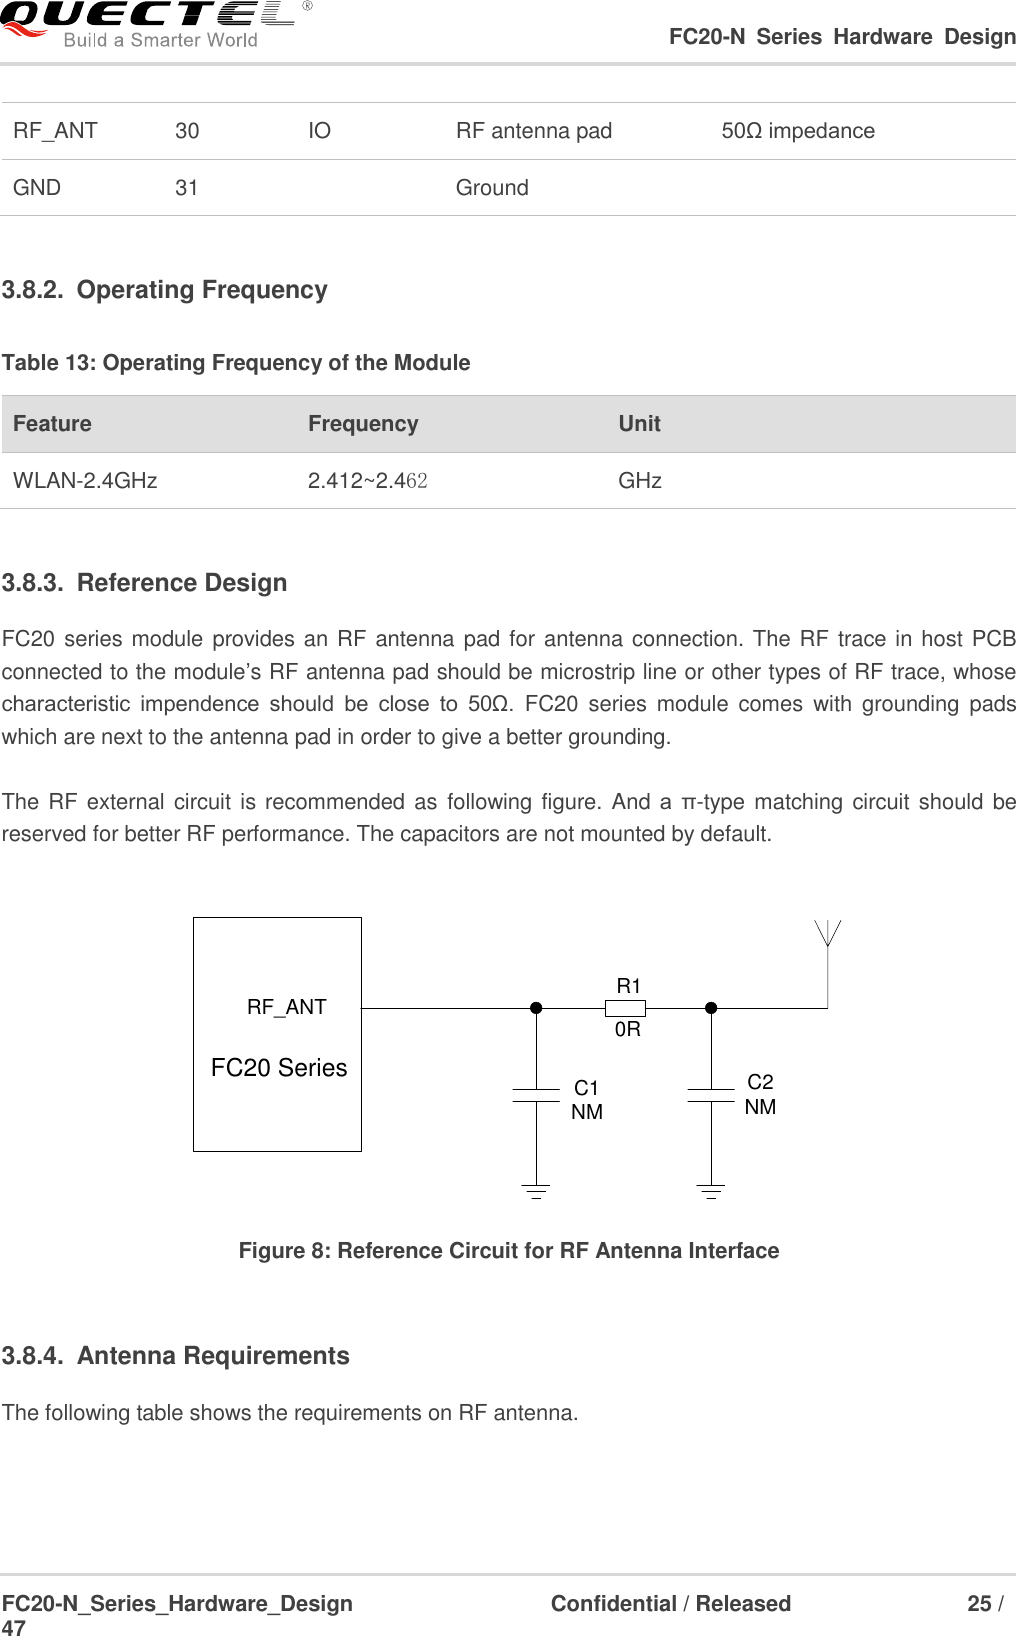                                                                                                                                     FC20-N  Series  Hardware  Design  FC20-N_Series_Hardware_Design                                Confidential / Released                    25 / 47    RF_ANT 30 IO RF antenna pad 50Ω impedance GND 31  Ground   3.8.2.  Operating Frequency Table 13: Operating Frequency of the Module Feature Frequency Unit WLAN-2.4GHz 2.412~2.462 GHz  3.8.3.  Reference Design FC20 series module provides an RF antenna pad for antenna connection. The RF trace in host PCB connected to the module’s RF antenna pad should be microstrip line or other types of RF trace, whose characteristic  impendence  should  be  close  to  50Ω.  FC20  series  module  comes  with  grounding  pads which are next to the antenna pad in order to give a better grounding.    The RF external circuit is recommended as  following figure.  And a  π-type matching circuit should be reserved for better RF performance. The capacitors are not mounted by default.  RF_ANT R1   C1NMC2NMFC20 Series0R Figure 8: Reference Circuit for RF Antenna Interface  3.8.4.  Antenna Requirements The following table shows the requirements on RF antenna.  